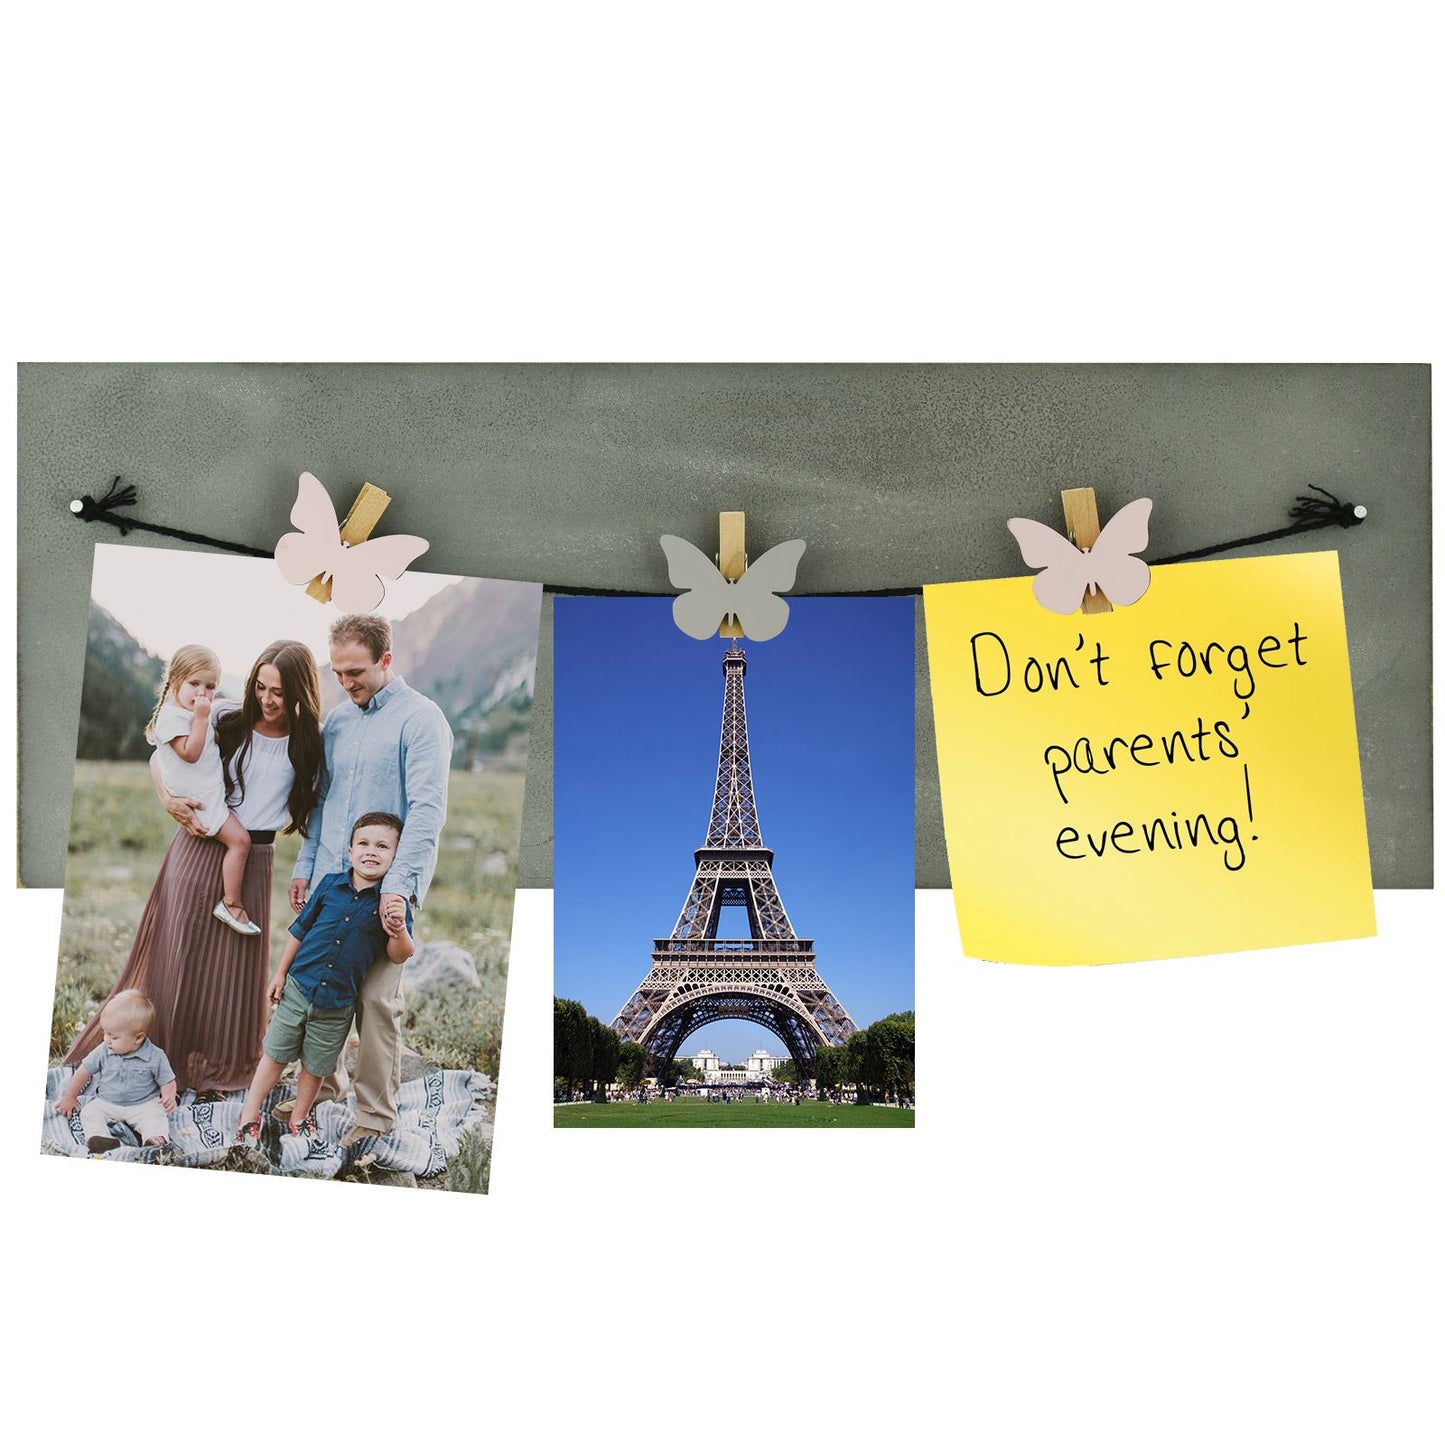 Display Your Memories With A Personalized And Stylish Photo Memory Board